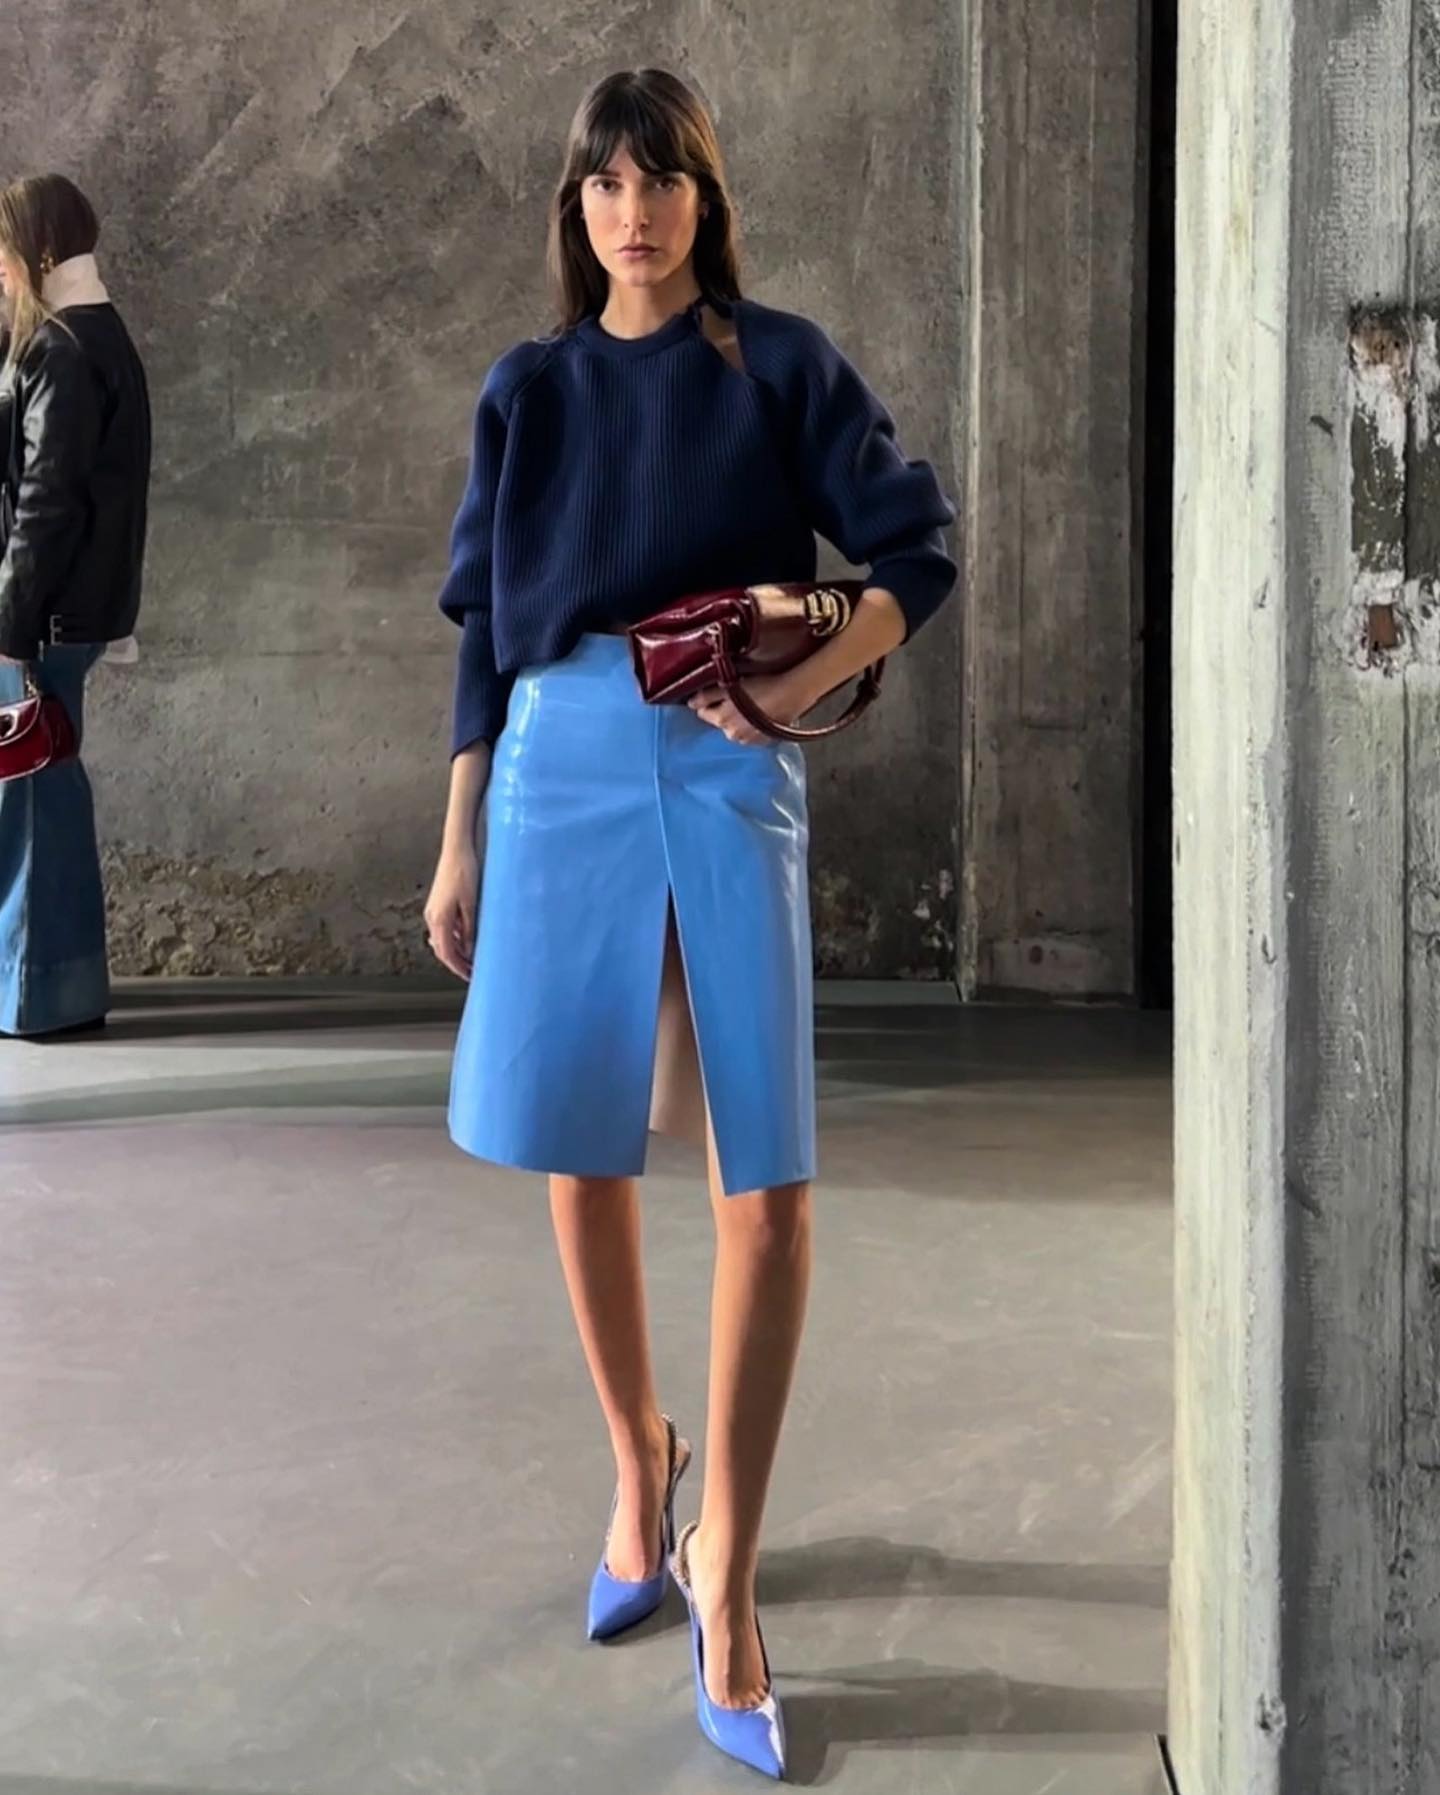 Leia Sfez wearing a navy sweater with a periwinkle blue skirt and shoes from Gucci.